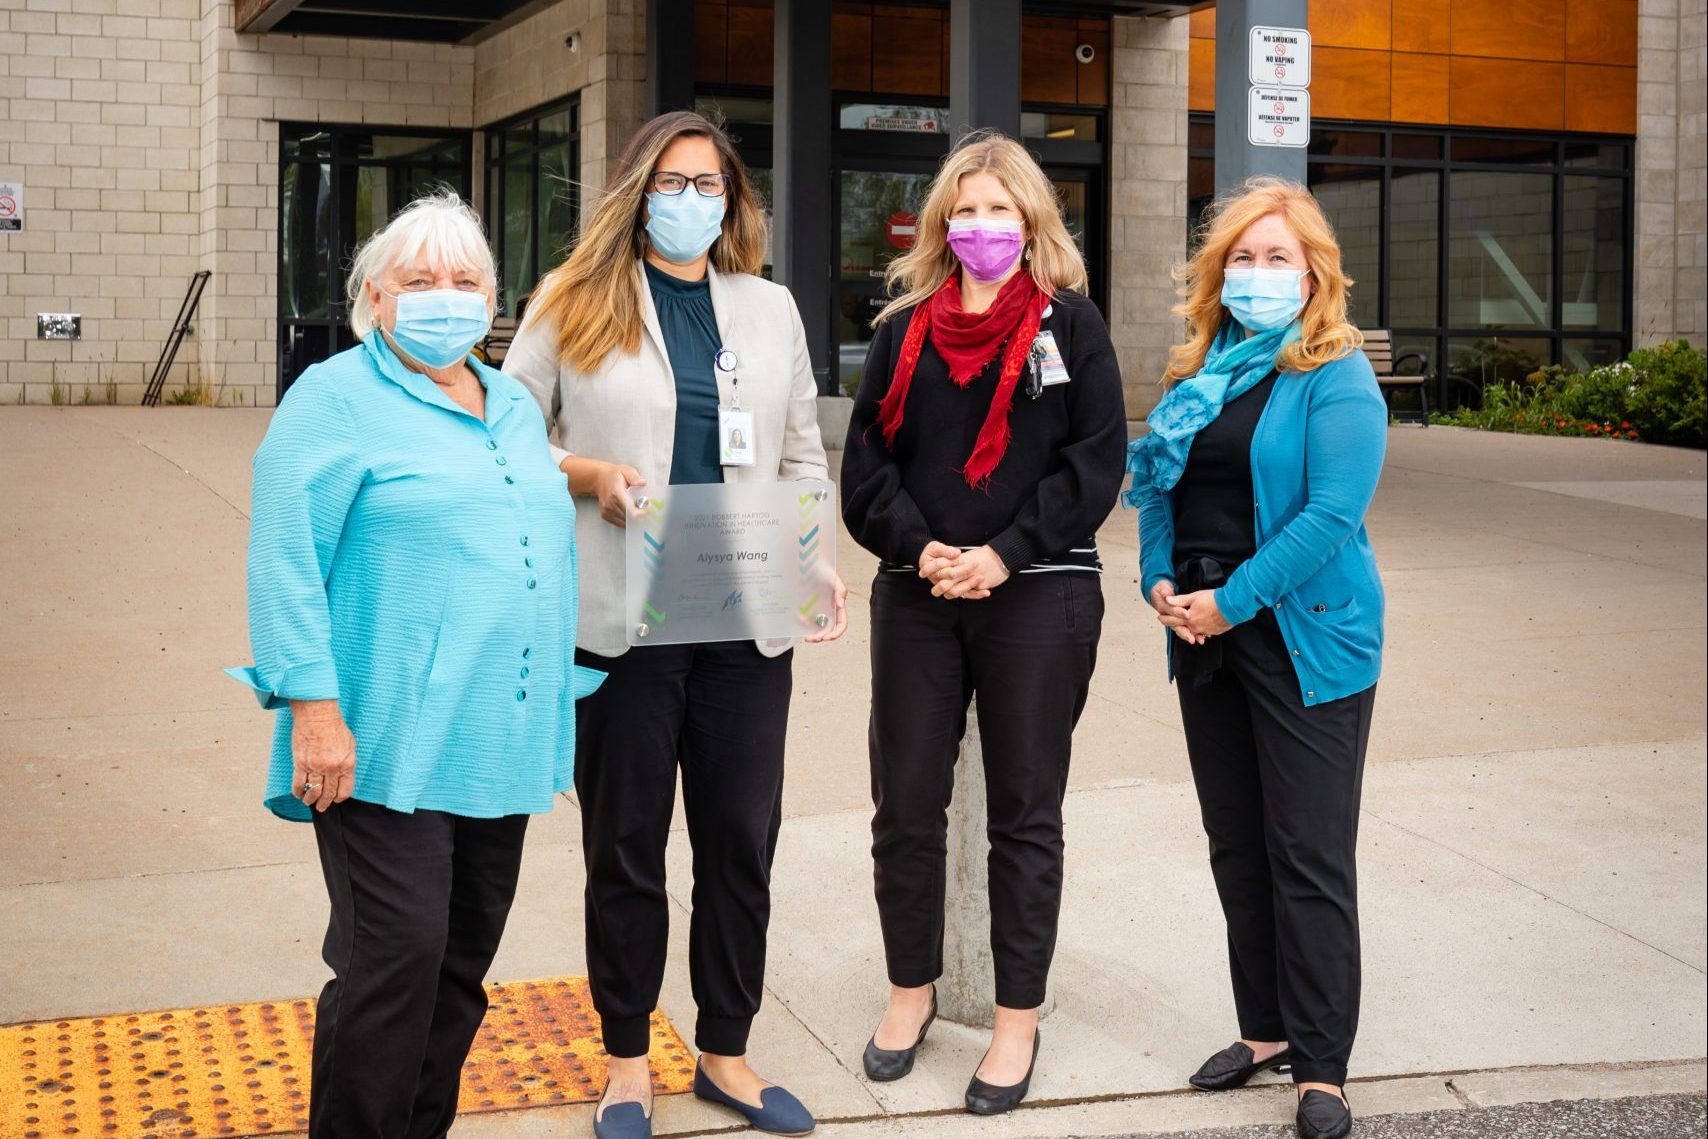 Four women in masks stand outside the hospital. One of them in holding an award plaque